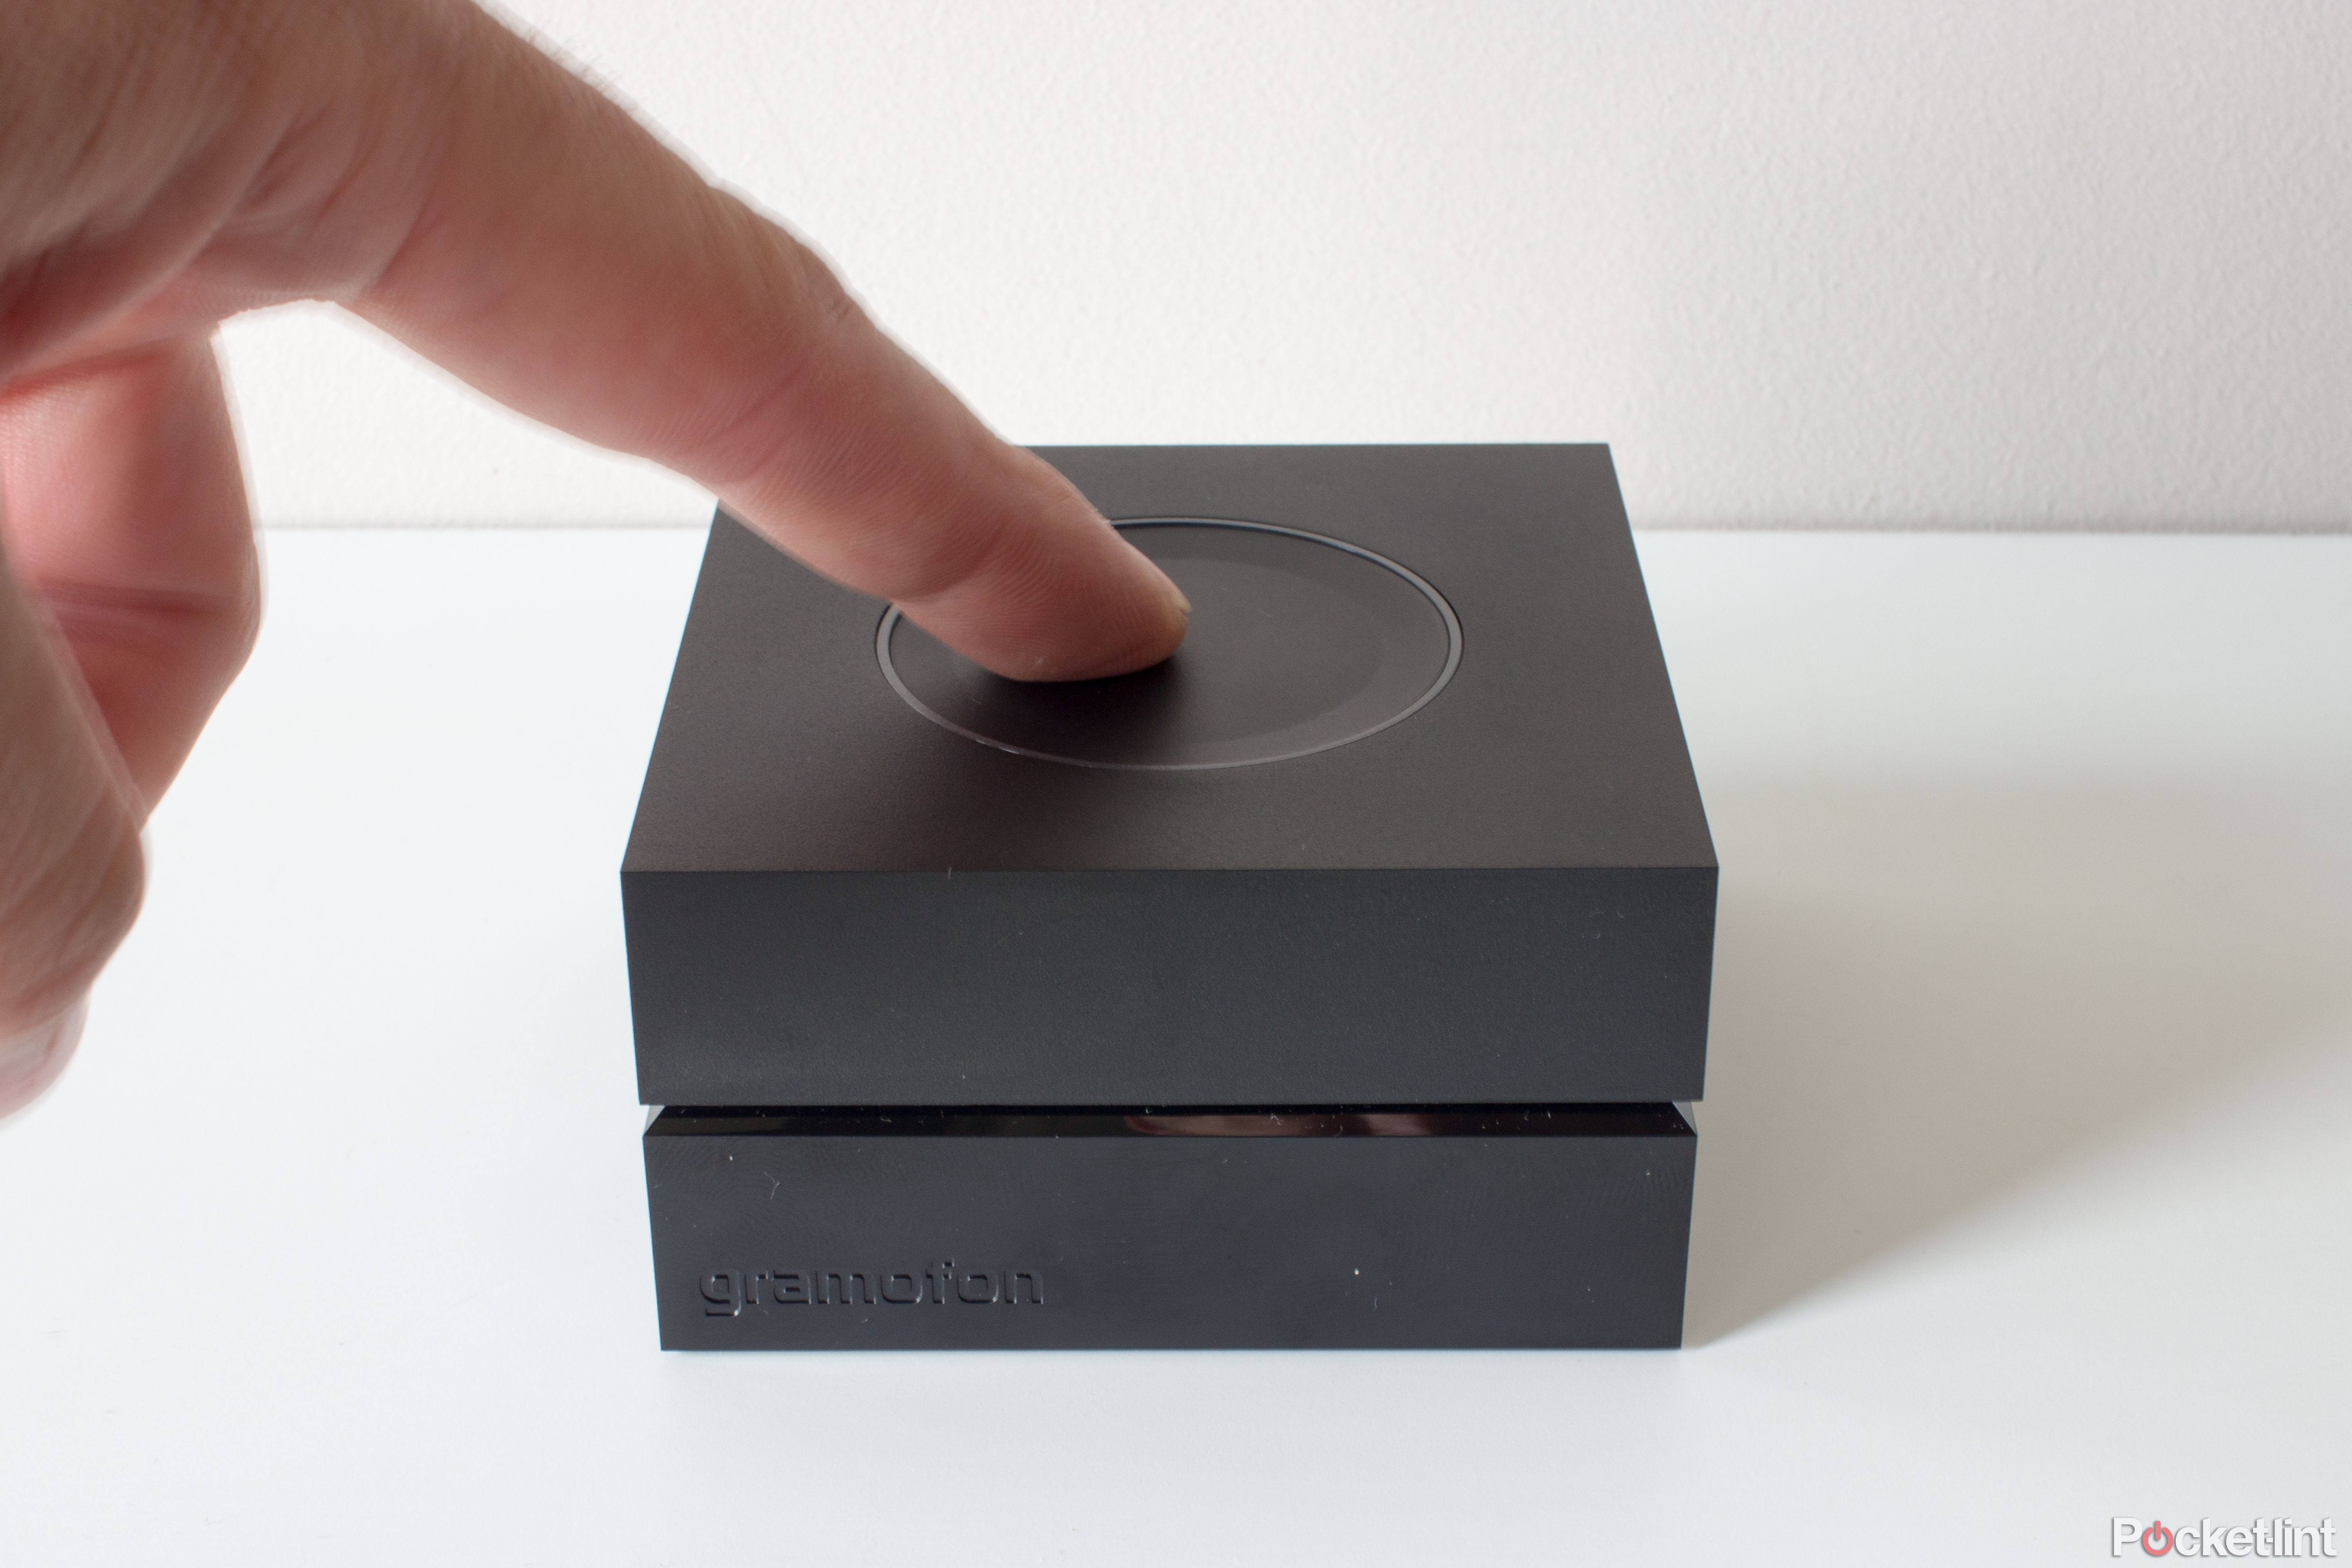 gramofon will connect your existing hi fi kit for spotify connect multiroom streaming more image 1